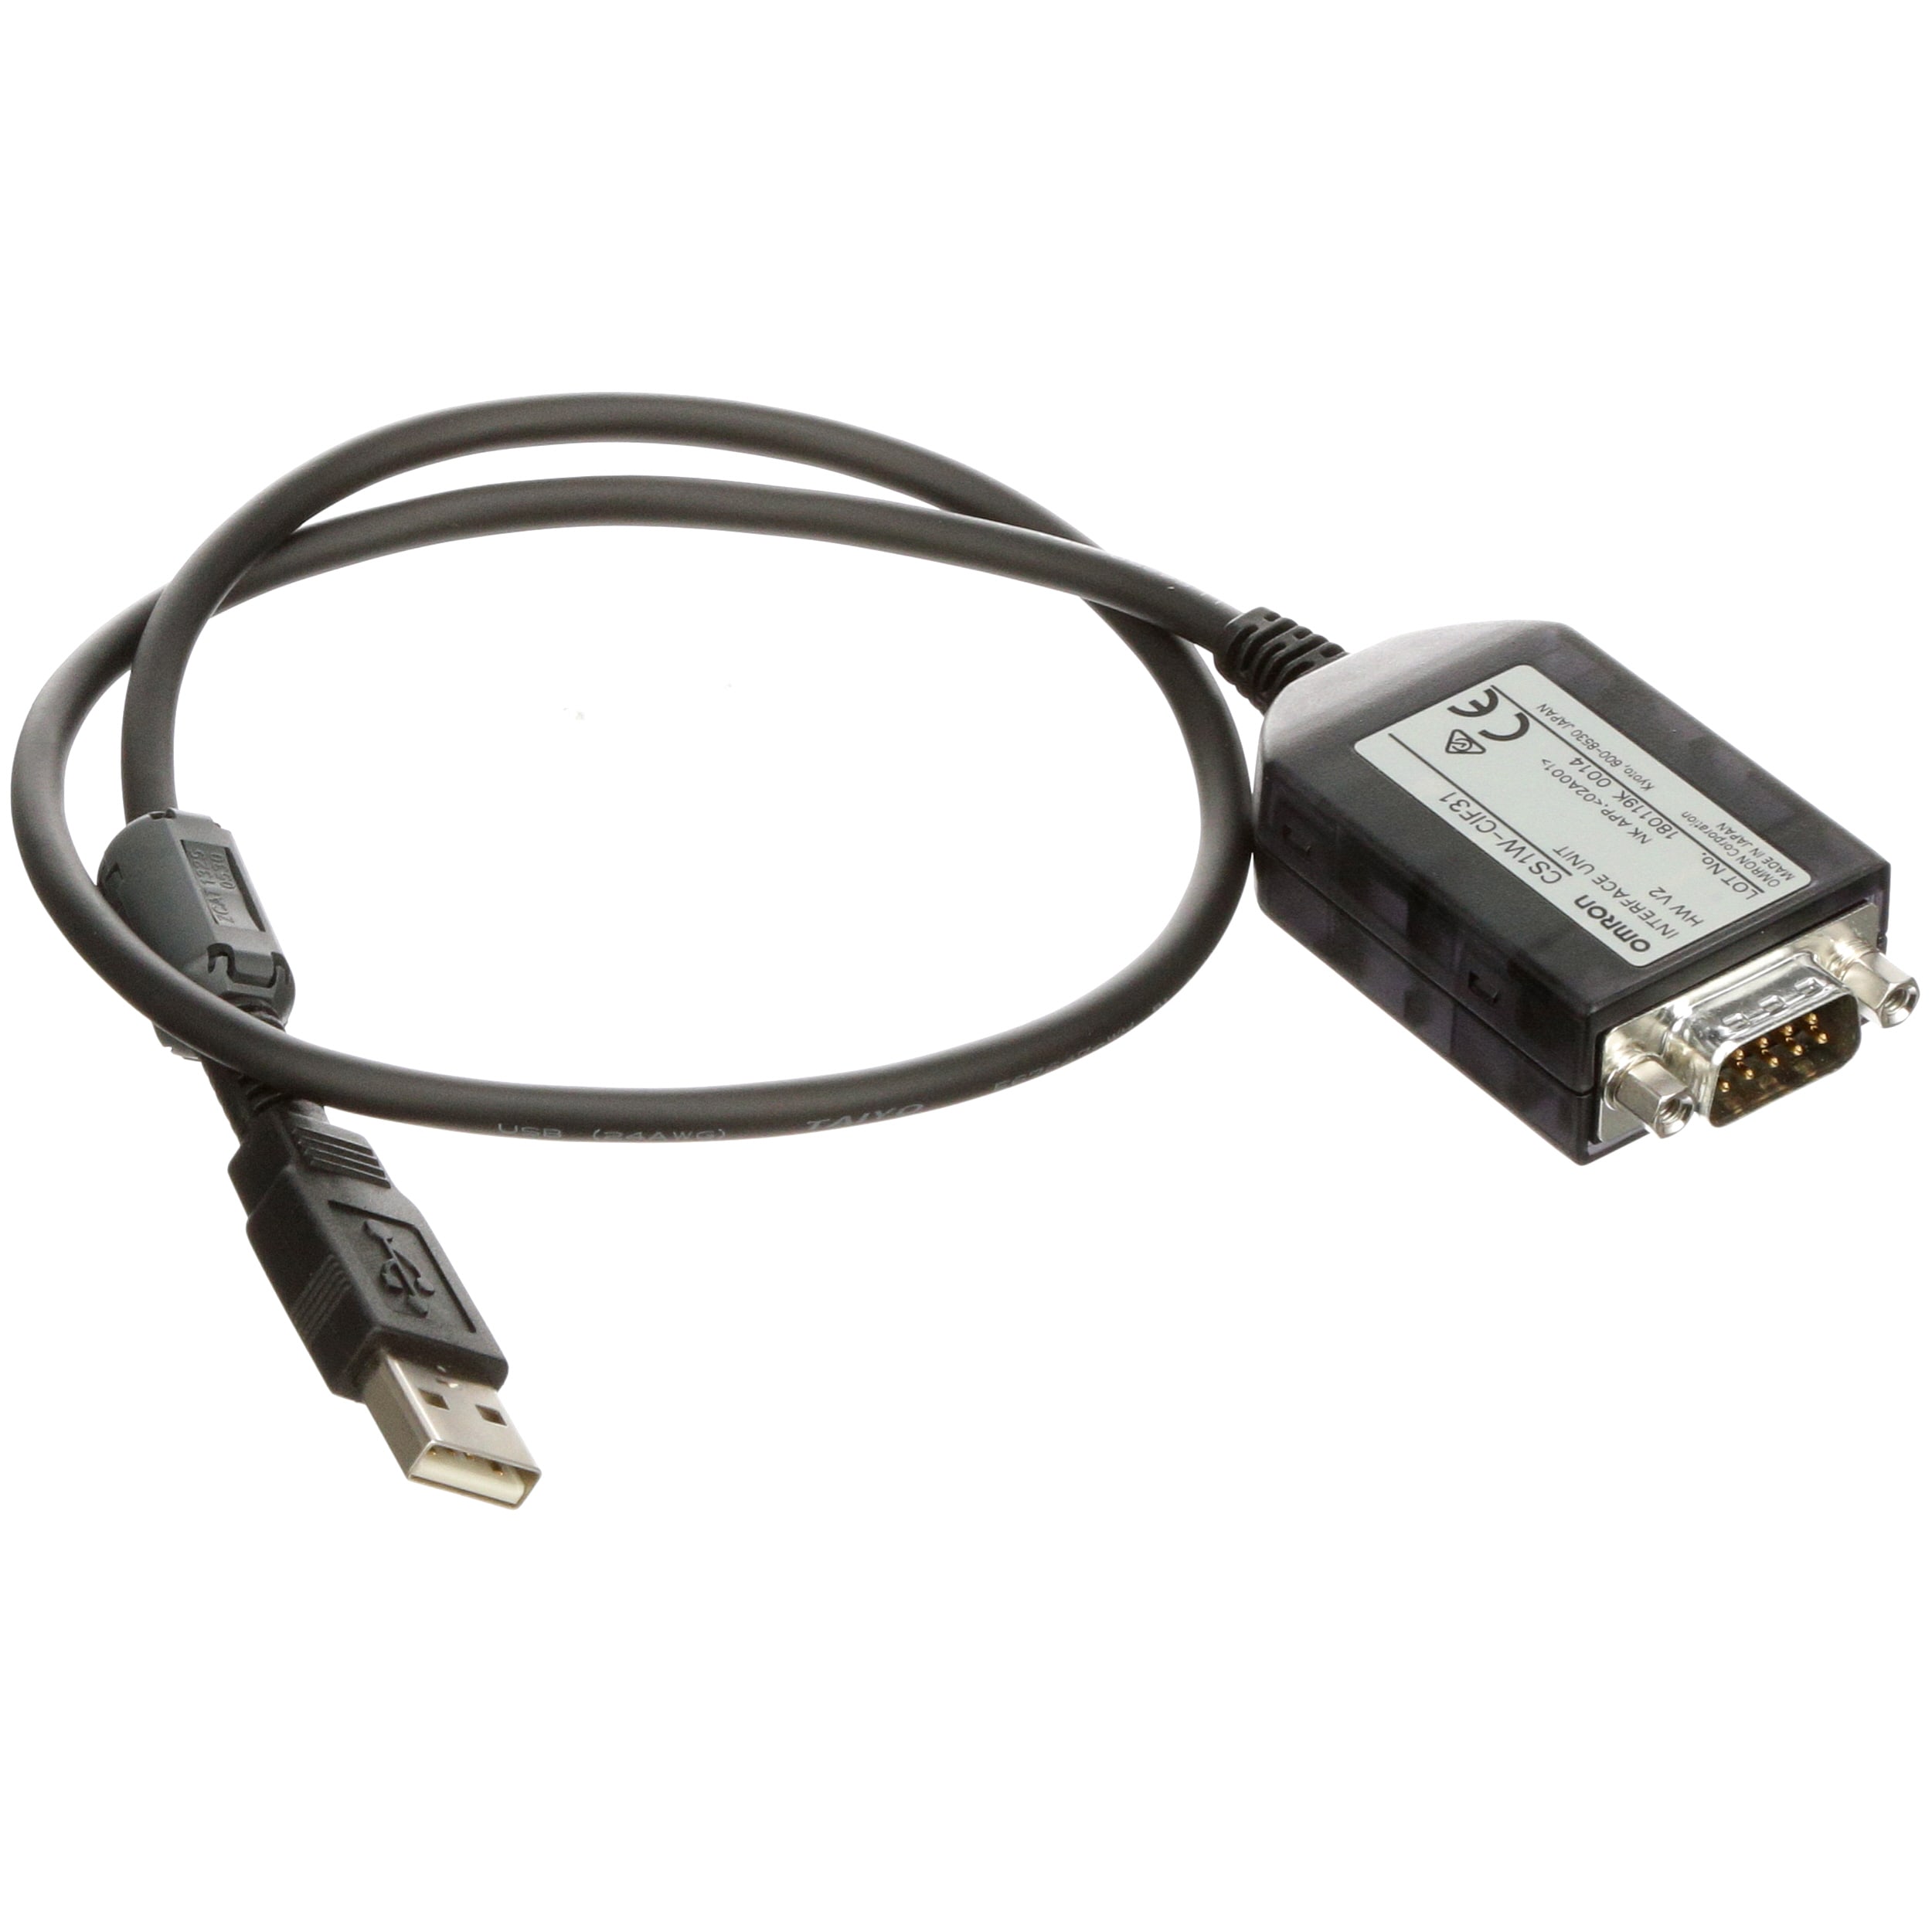 Programming Cable USB to RS232 Conversion for omron CS1WCIF31 CS1W-CIF31 PLC 